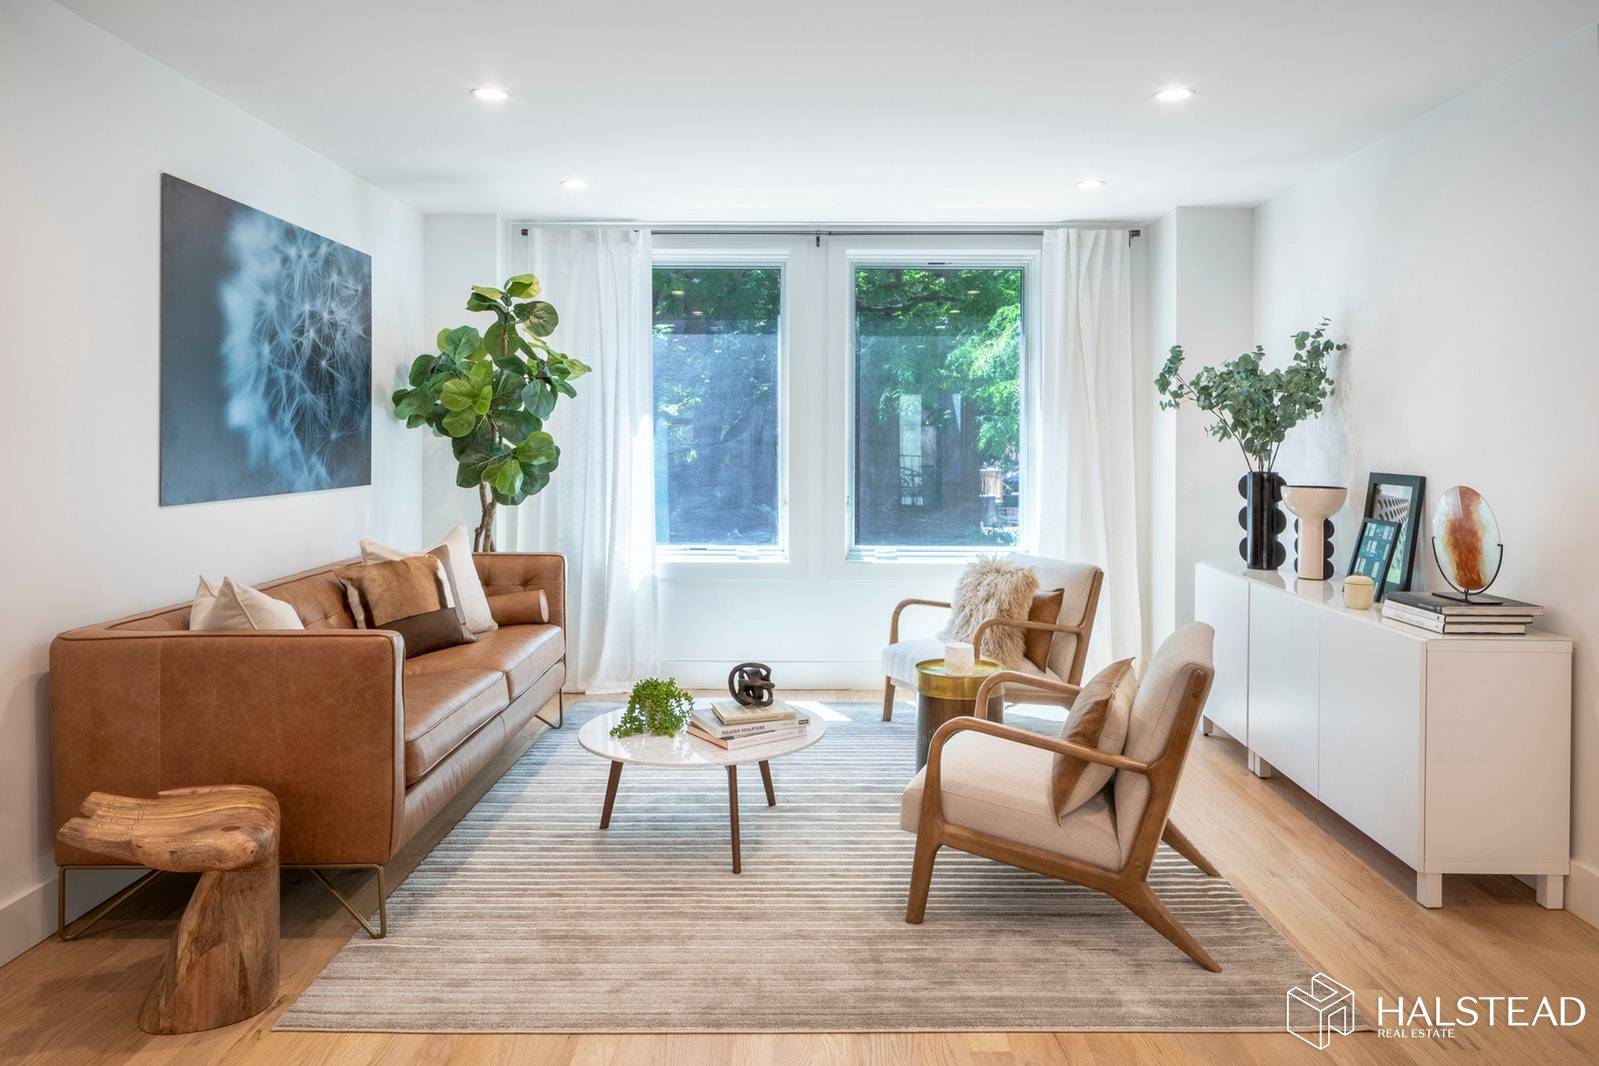 This spacious floor through residence features both east and west exposures creating a bright and airy space in every room throughout the home.